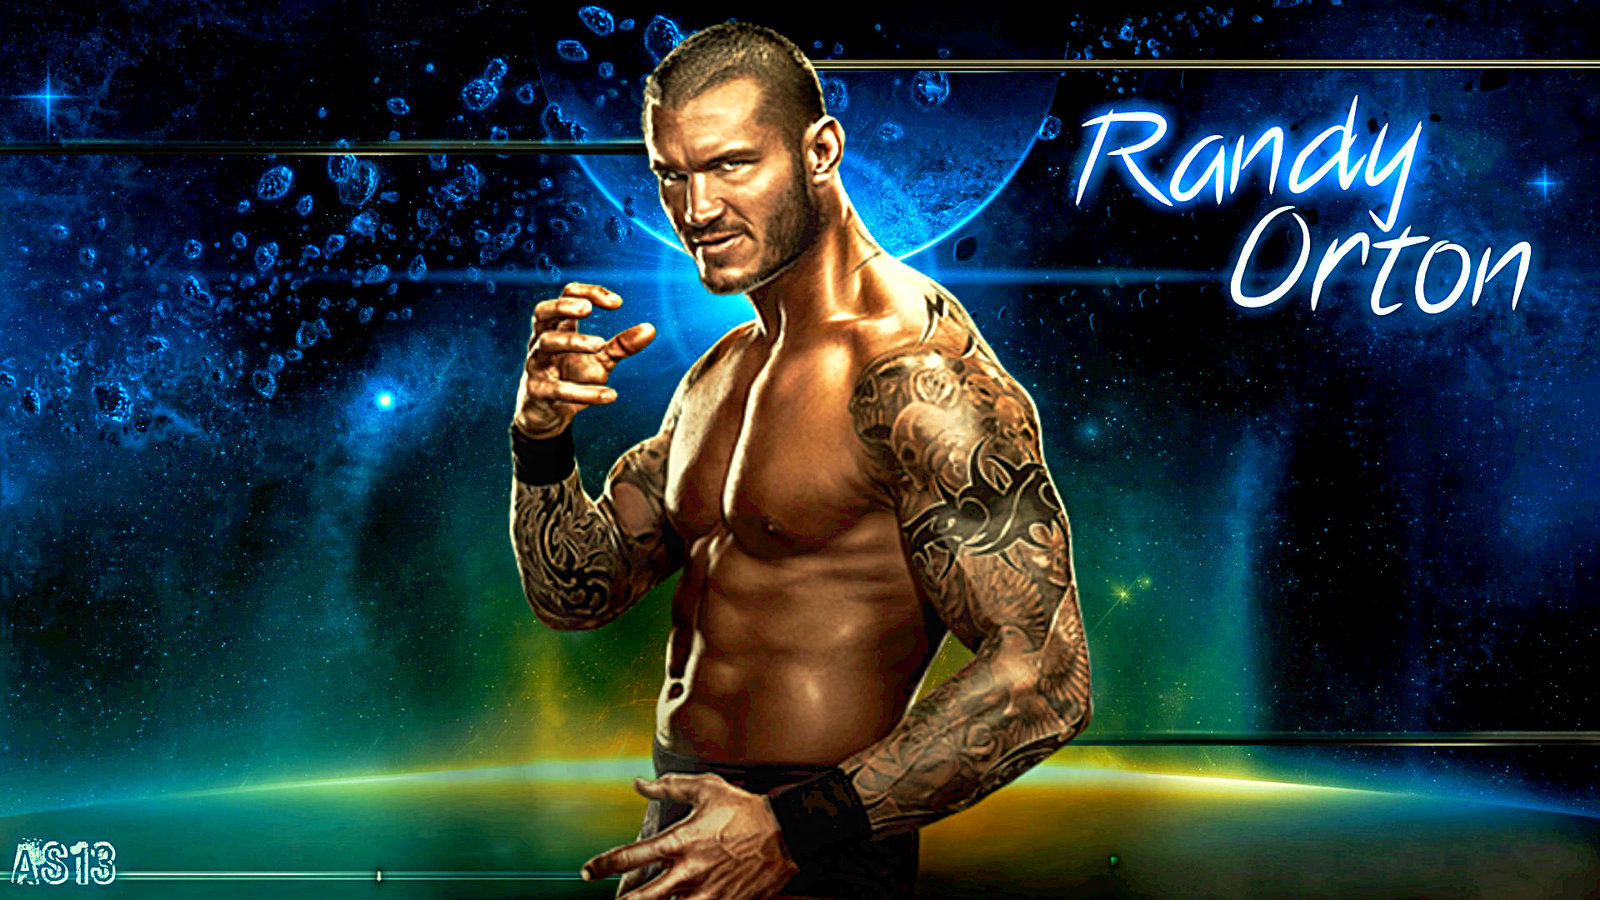 Randy Orton Wallpaper By Anurags13